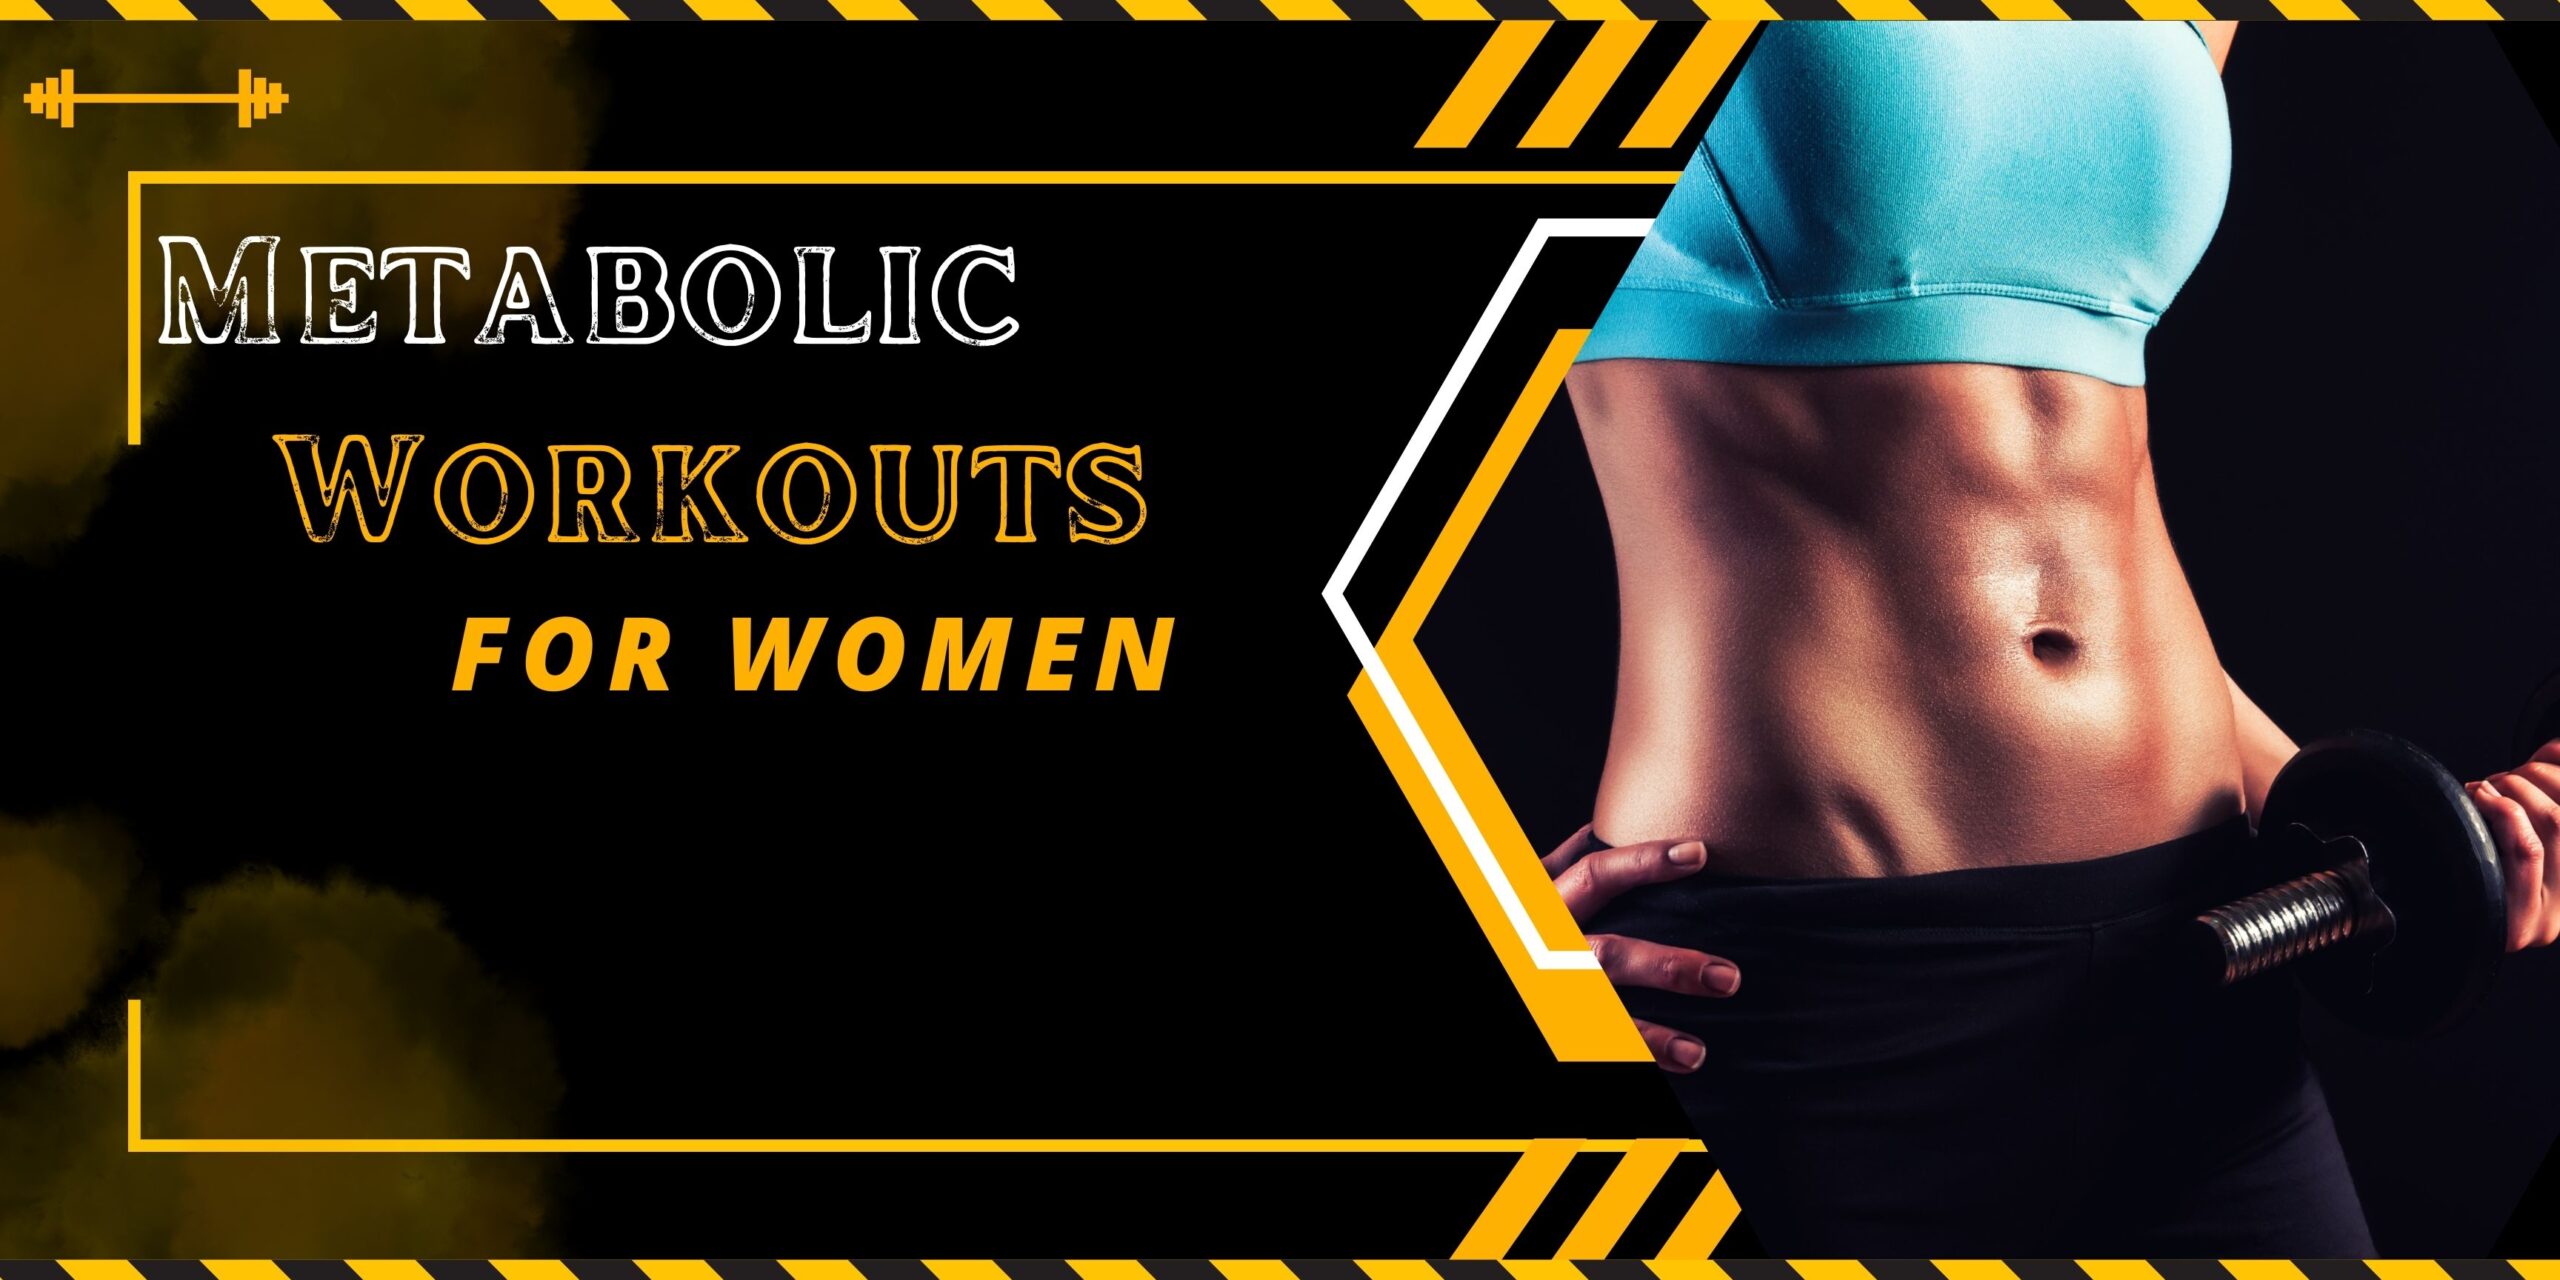 Metabolic Workouts for Women